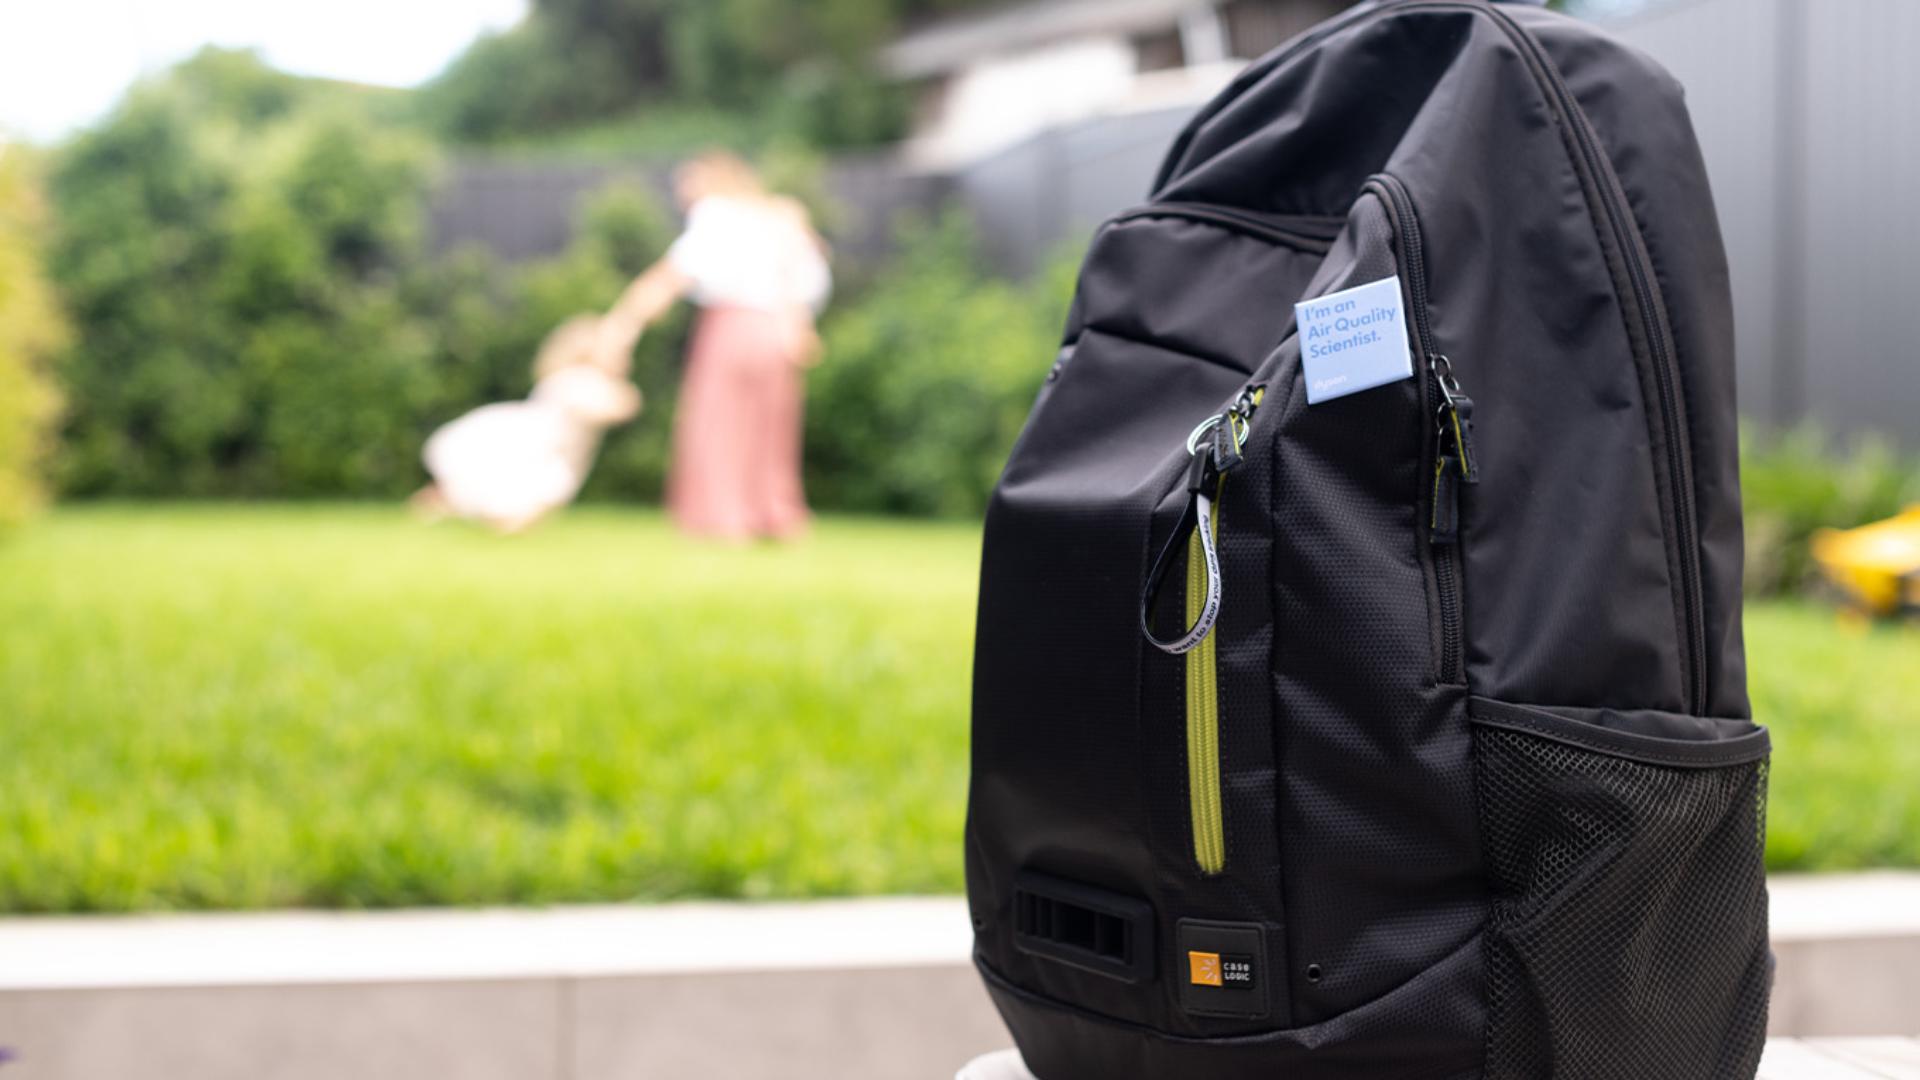 Dyson air quality backpacks track exposure of Australian children to air pollution in first case study of its kind